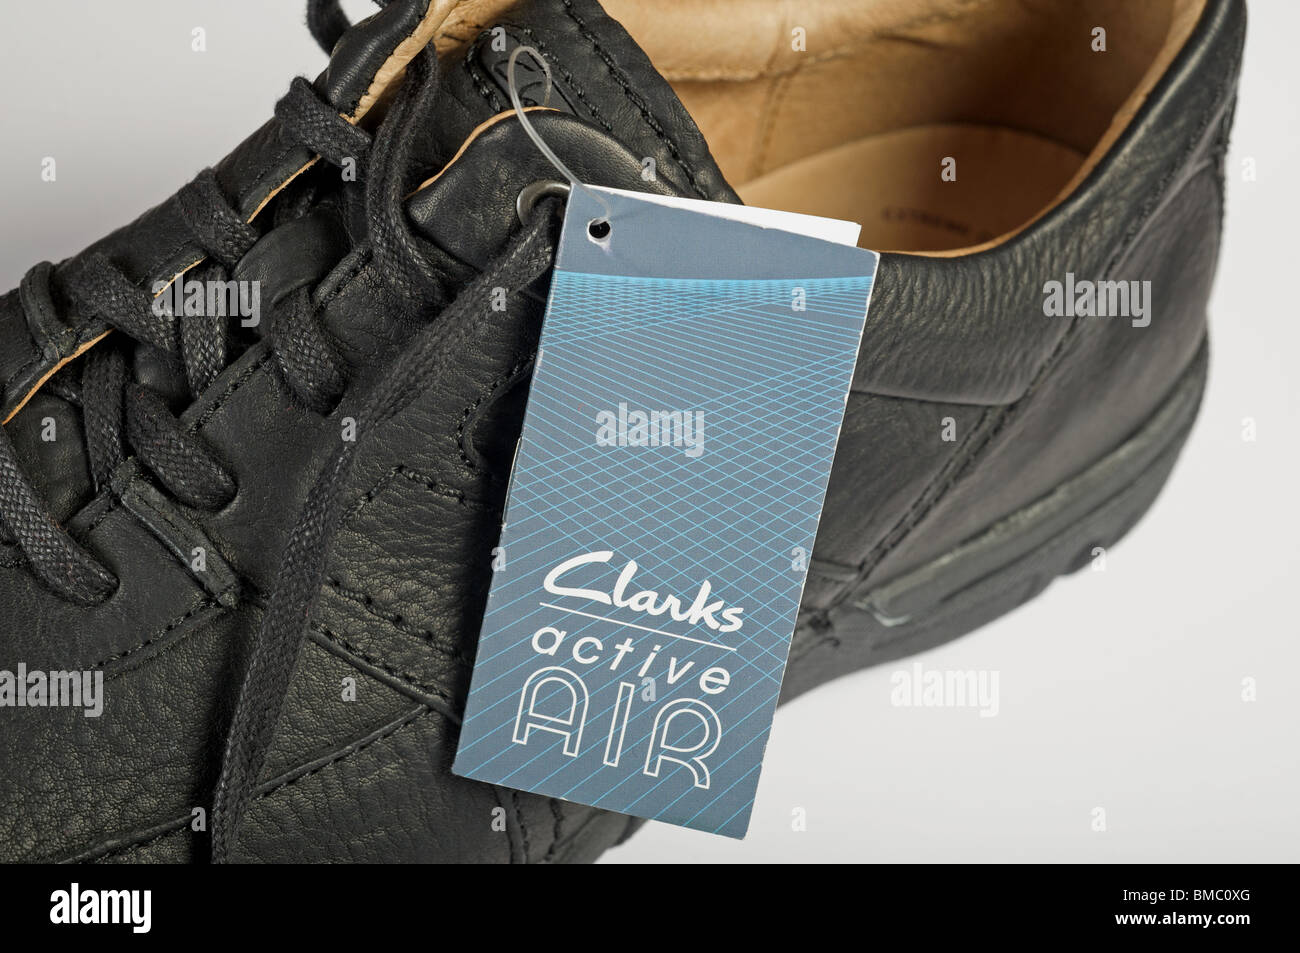 Clarks Active mens shoes Stock Photo - Alamy